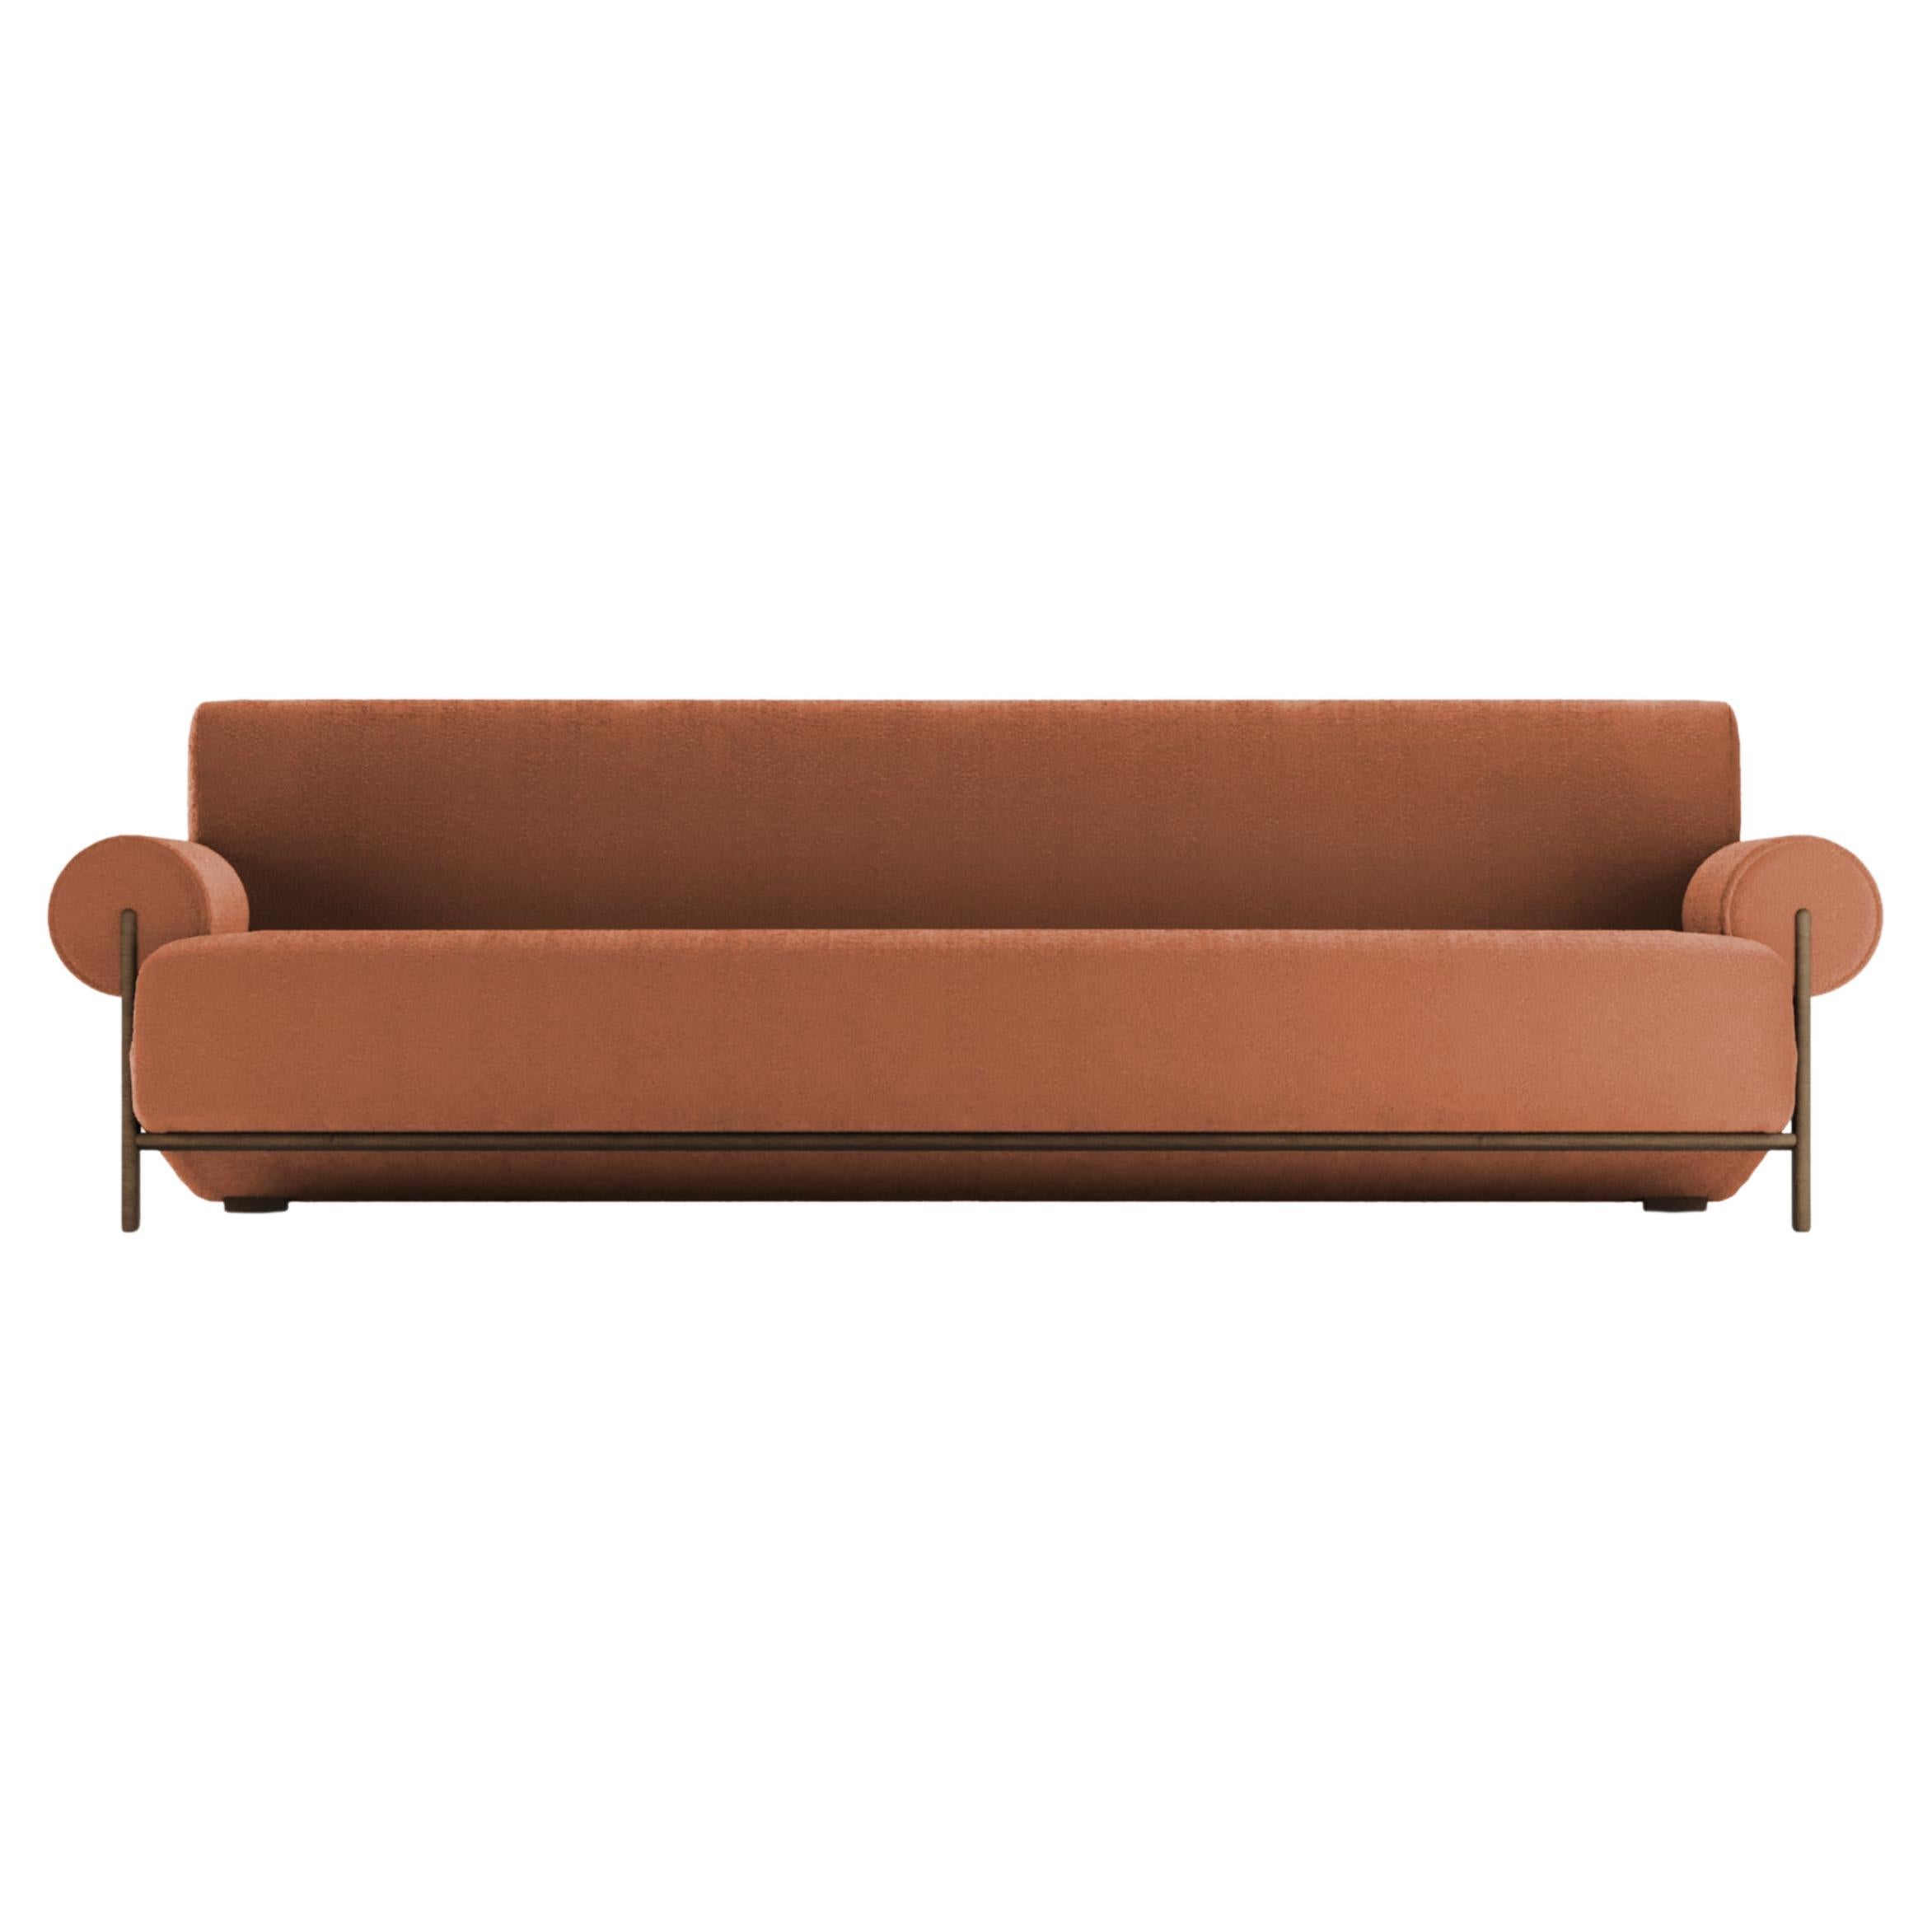 Contemporary Modern Paloma Sofa in Bouclé Burnt Orange by Collector For Sale